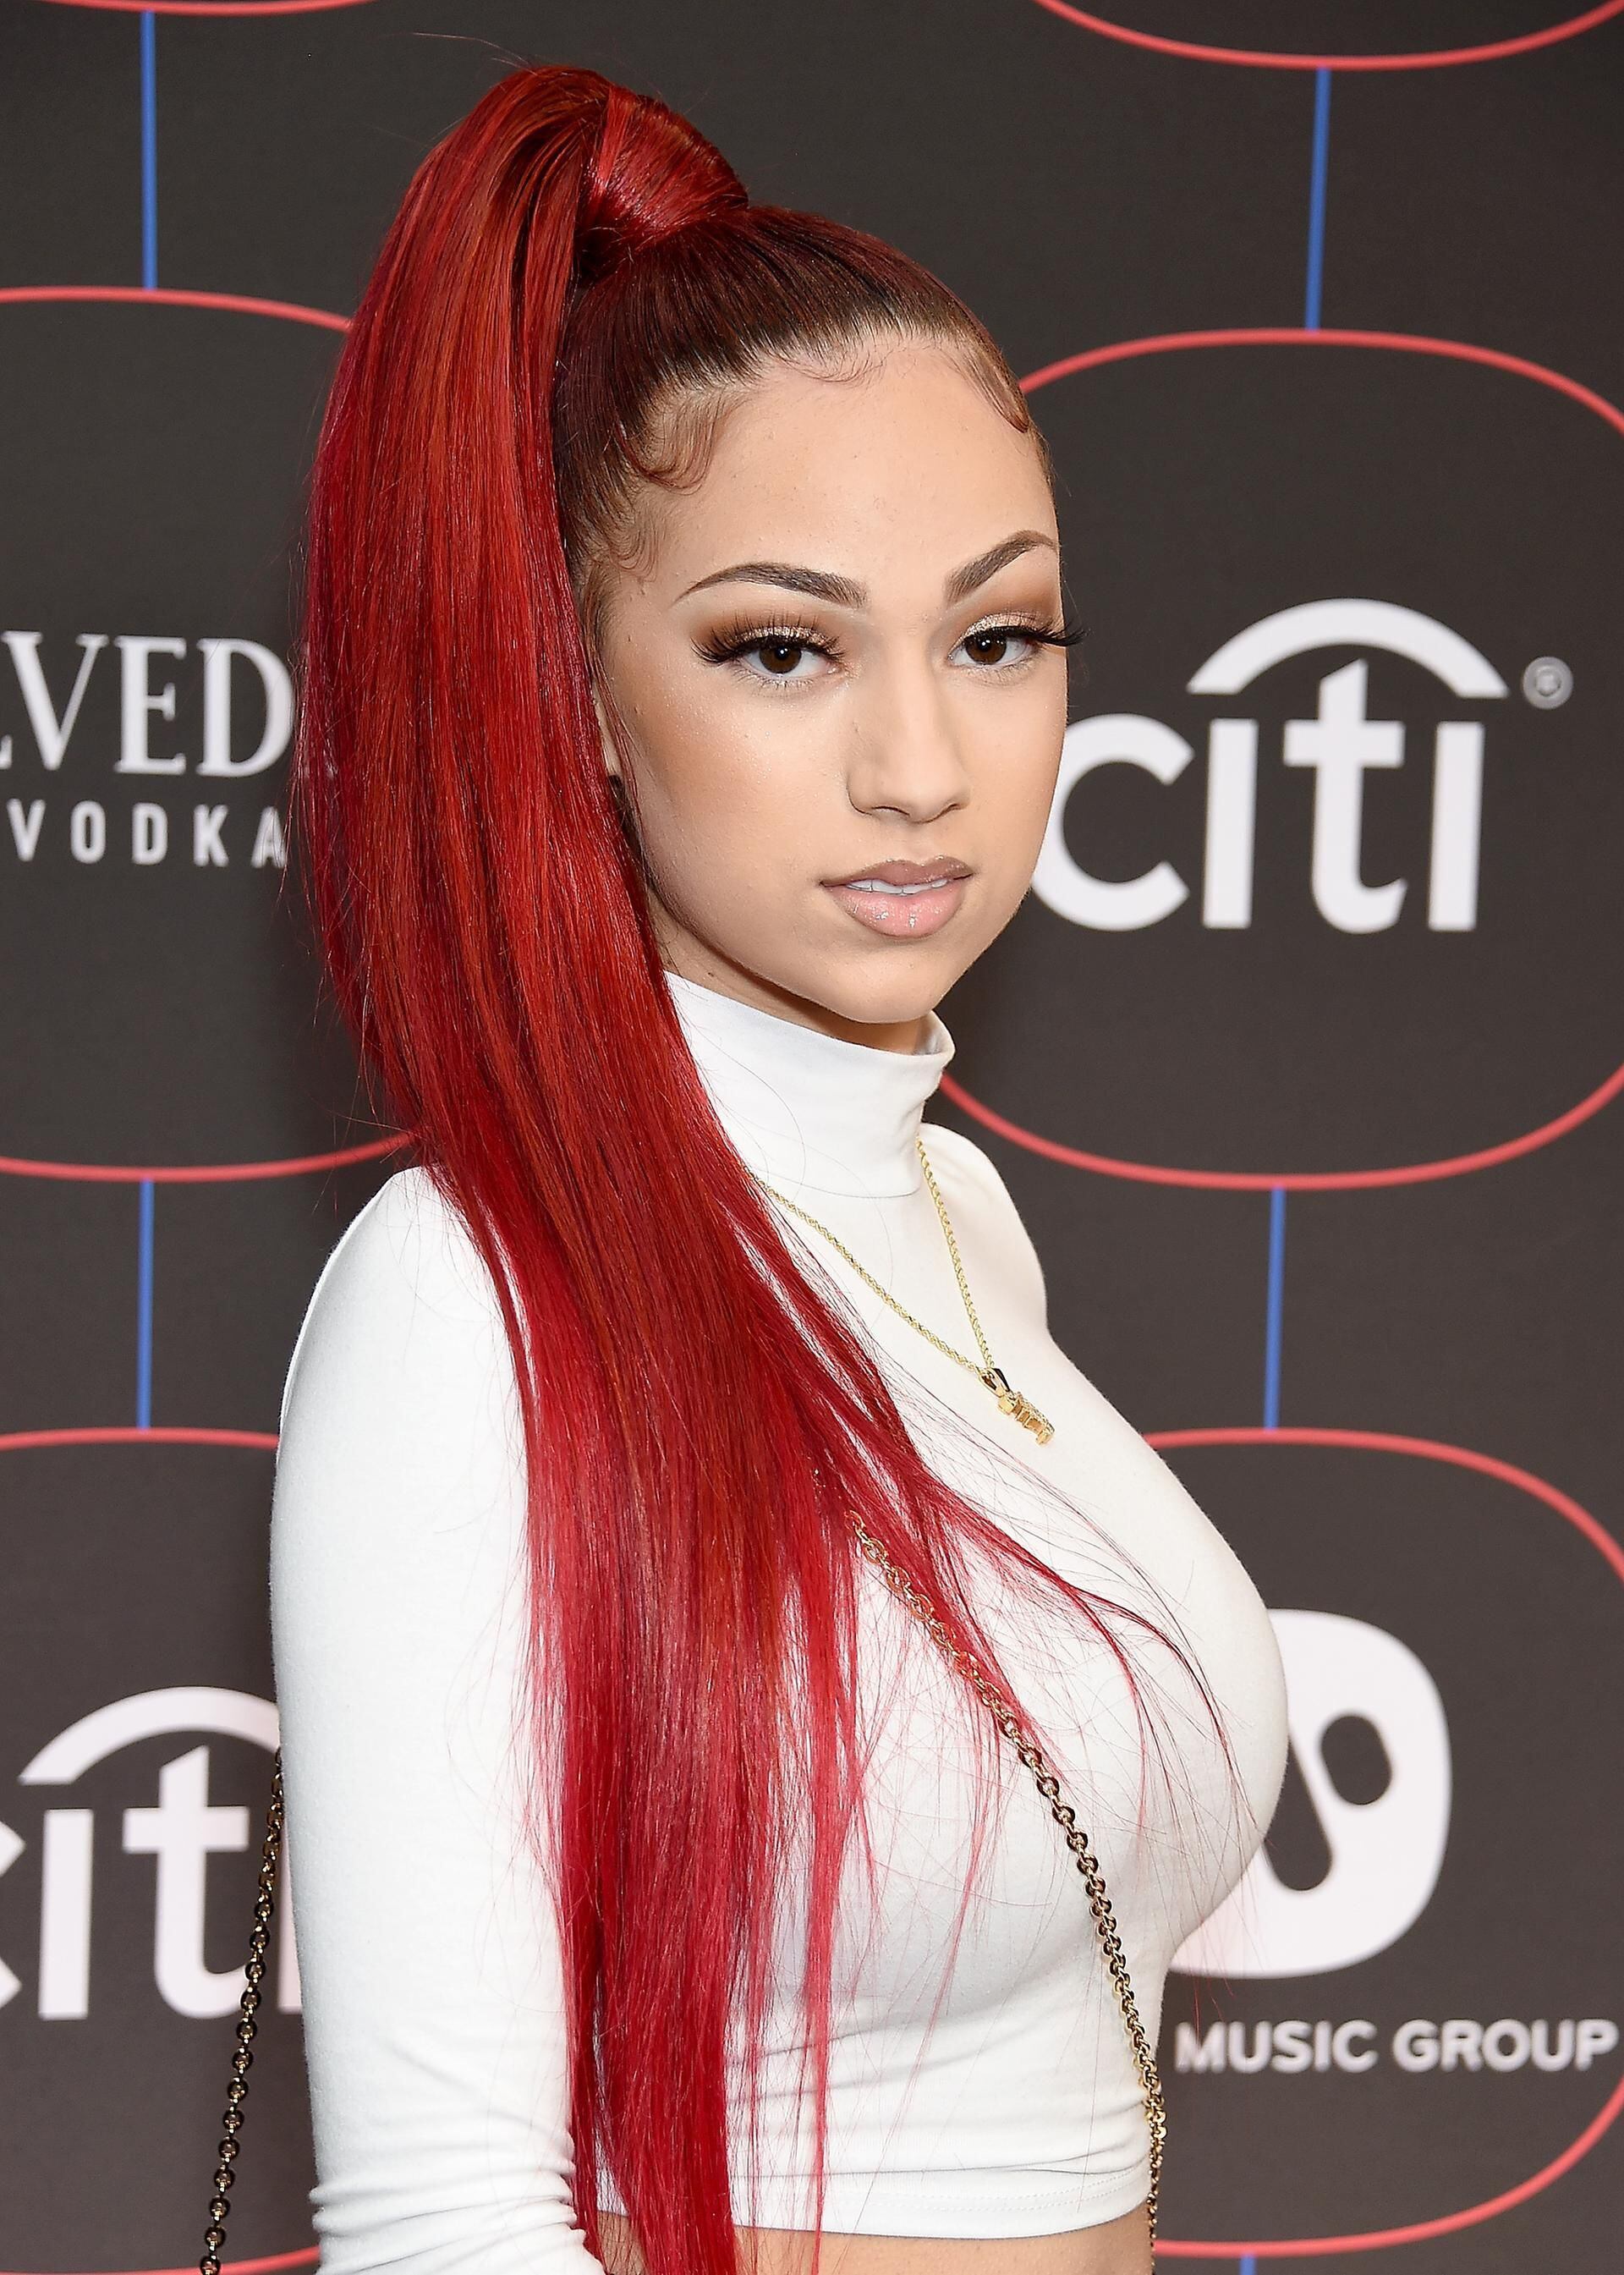 Bhad Bhabie O-lyF*ns subscribers disappointed at content, Bhabie promises  to send exclusive 